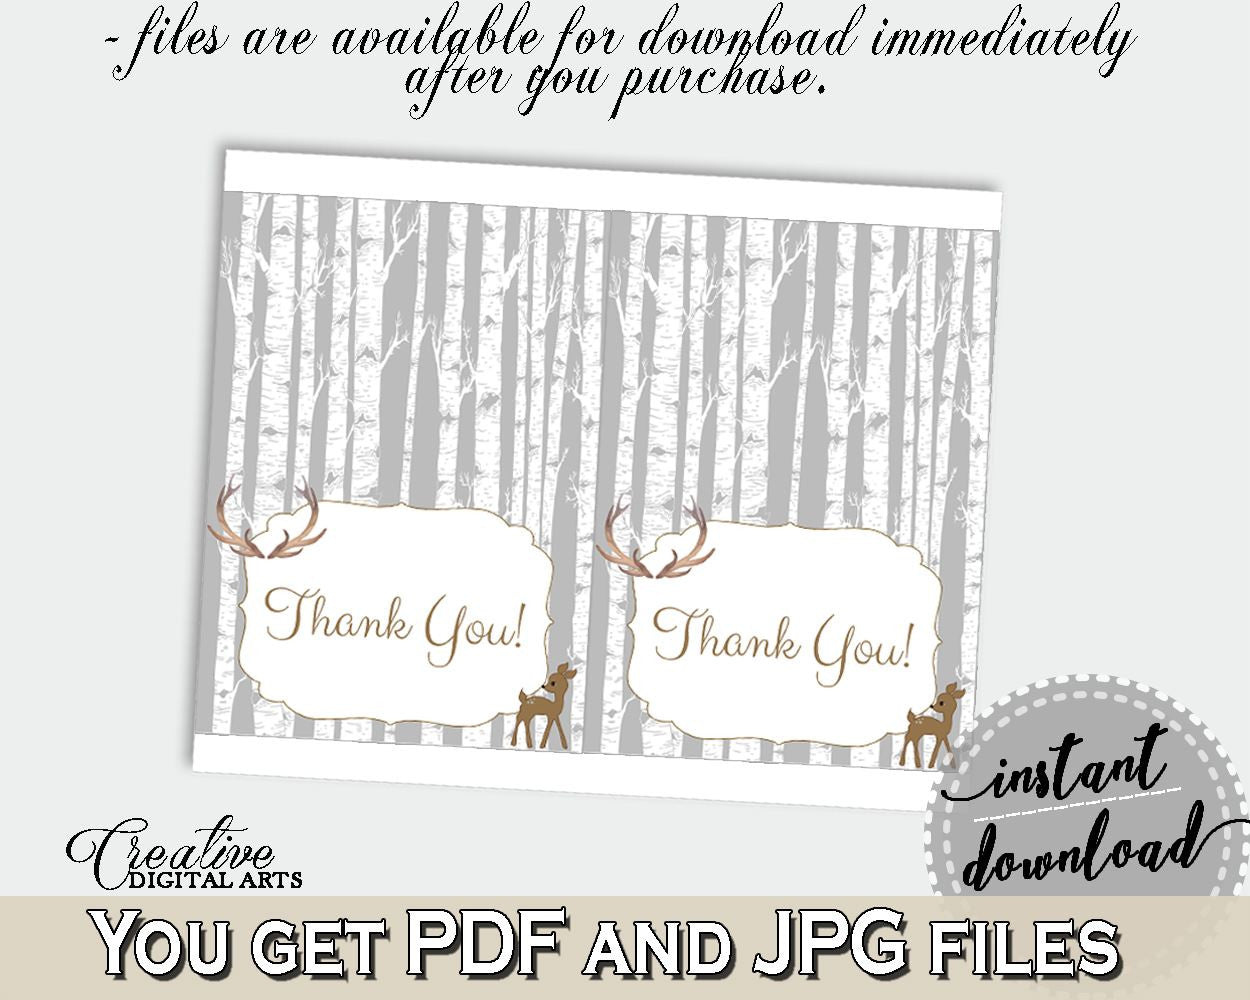 Thank You Card Baby Shower Thank You Card Deer Baby Shower Thank You Card Baby Shower Deer Thank You Card Gray Brown - Z20R3 - Digital Product